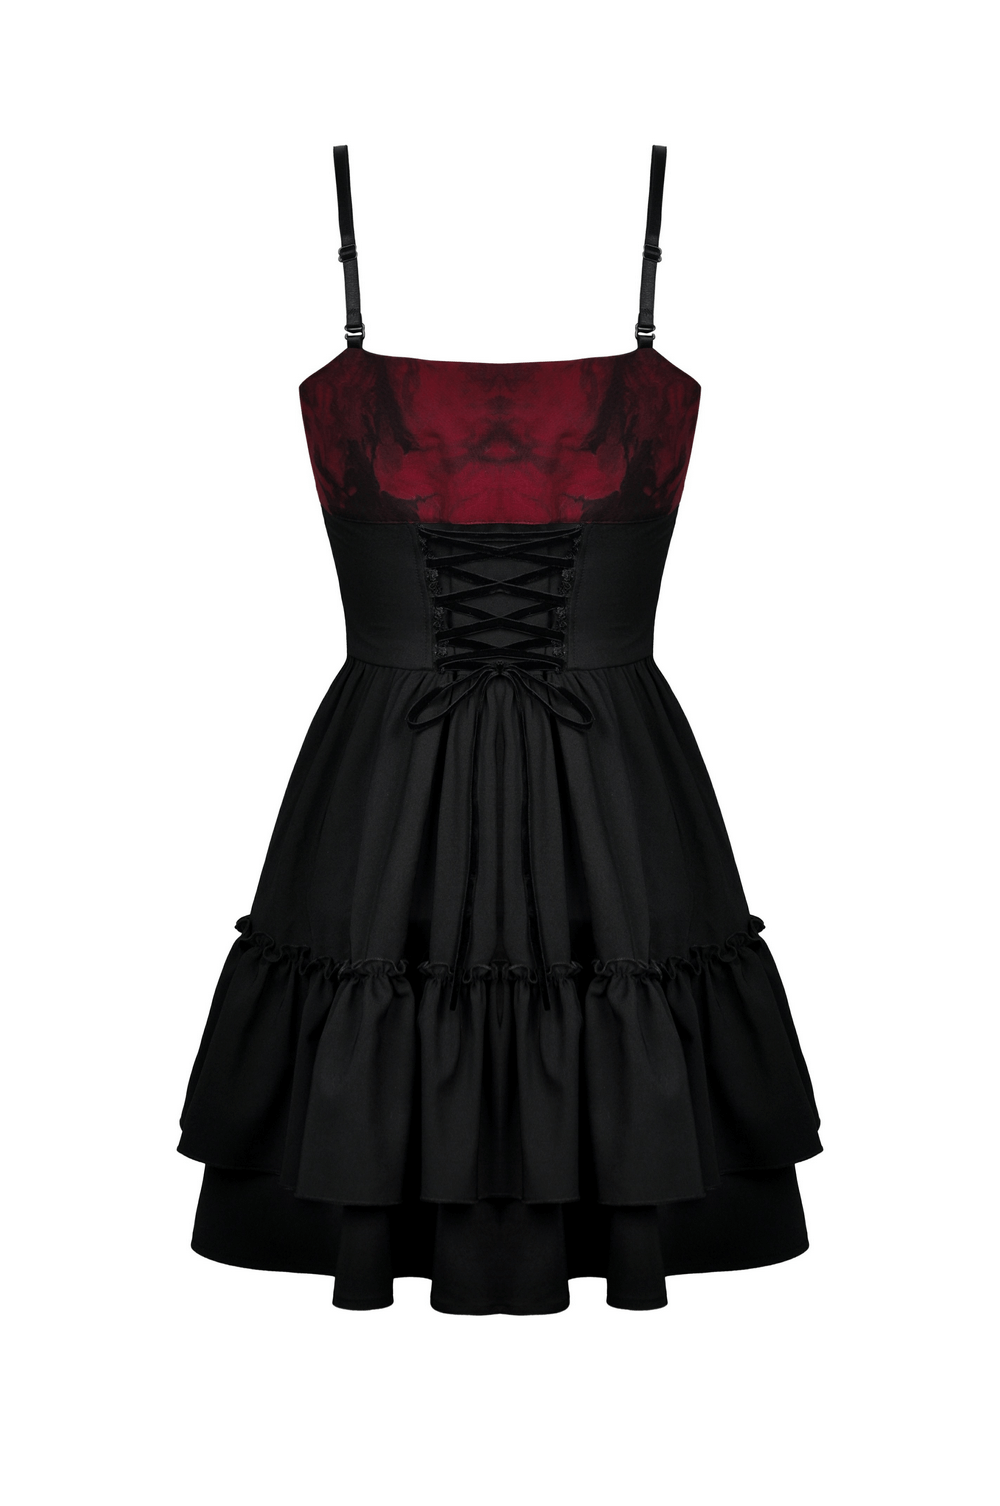 Black And Red Spiderweb Print Gothic Dress with Bow